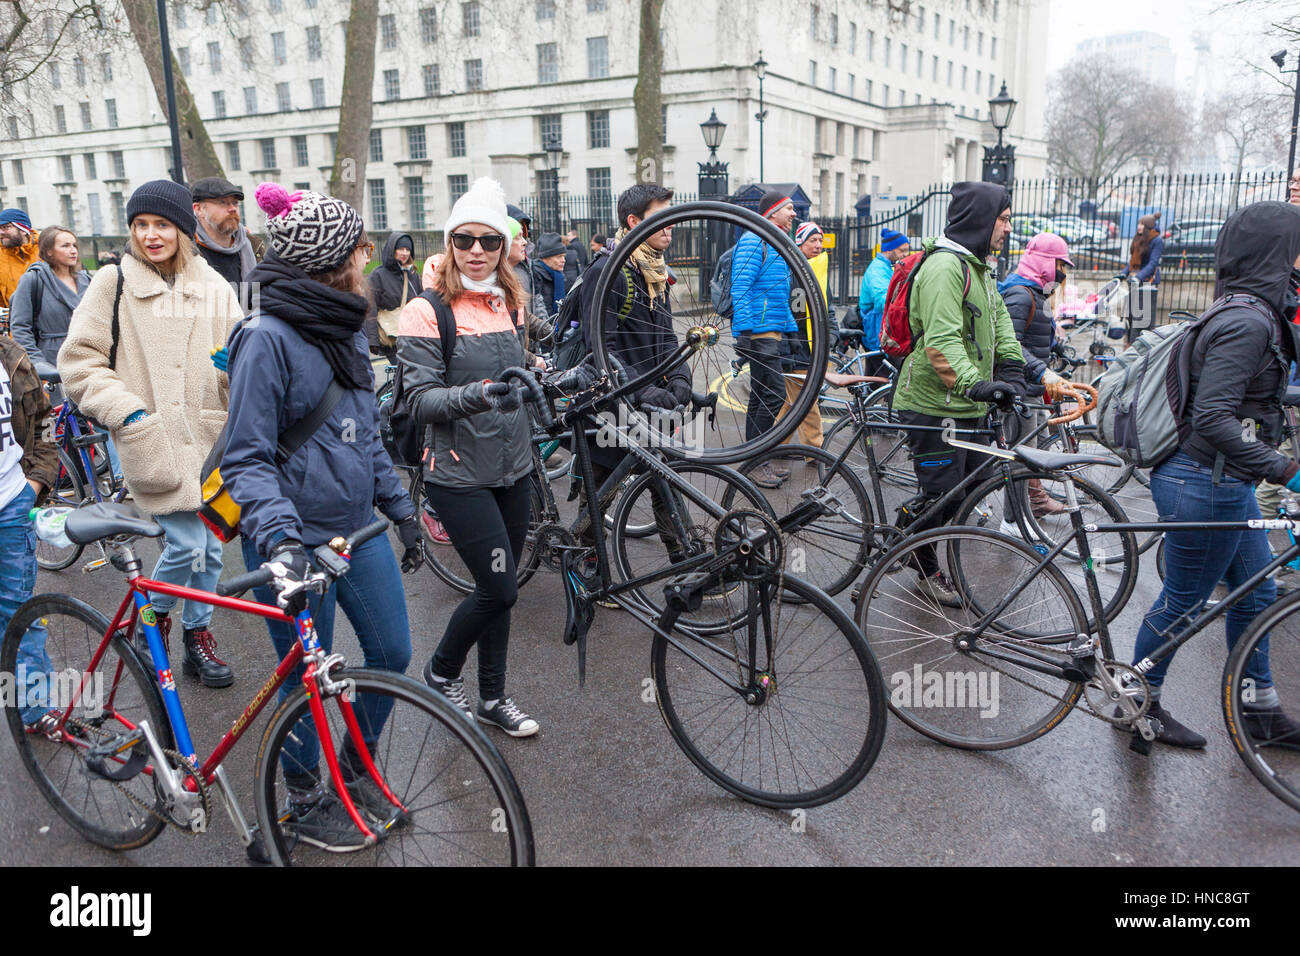 London, UK. 11th February 2017.  As air pollution kills thousands every year, hundreds of cyclists set out from Trafalgar Square to stage a 'Dye-In' protest outside The Treasury demanding that the Chancellor increase funding for cycling, rising to 10% of the UK transport budget by 2020. Credit: Steve Parkins/Alamy Live News Stock Photo